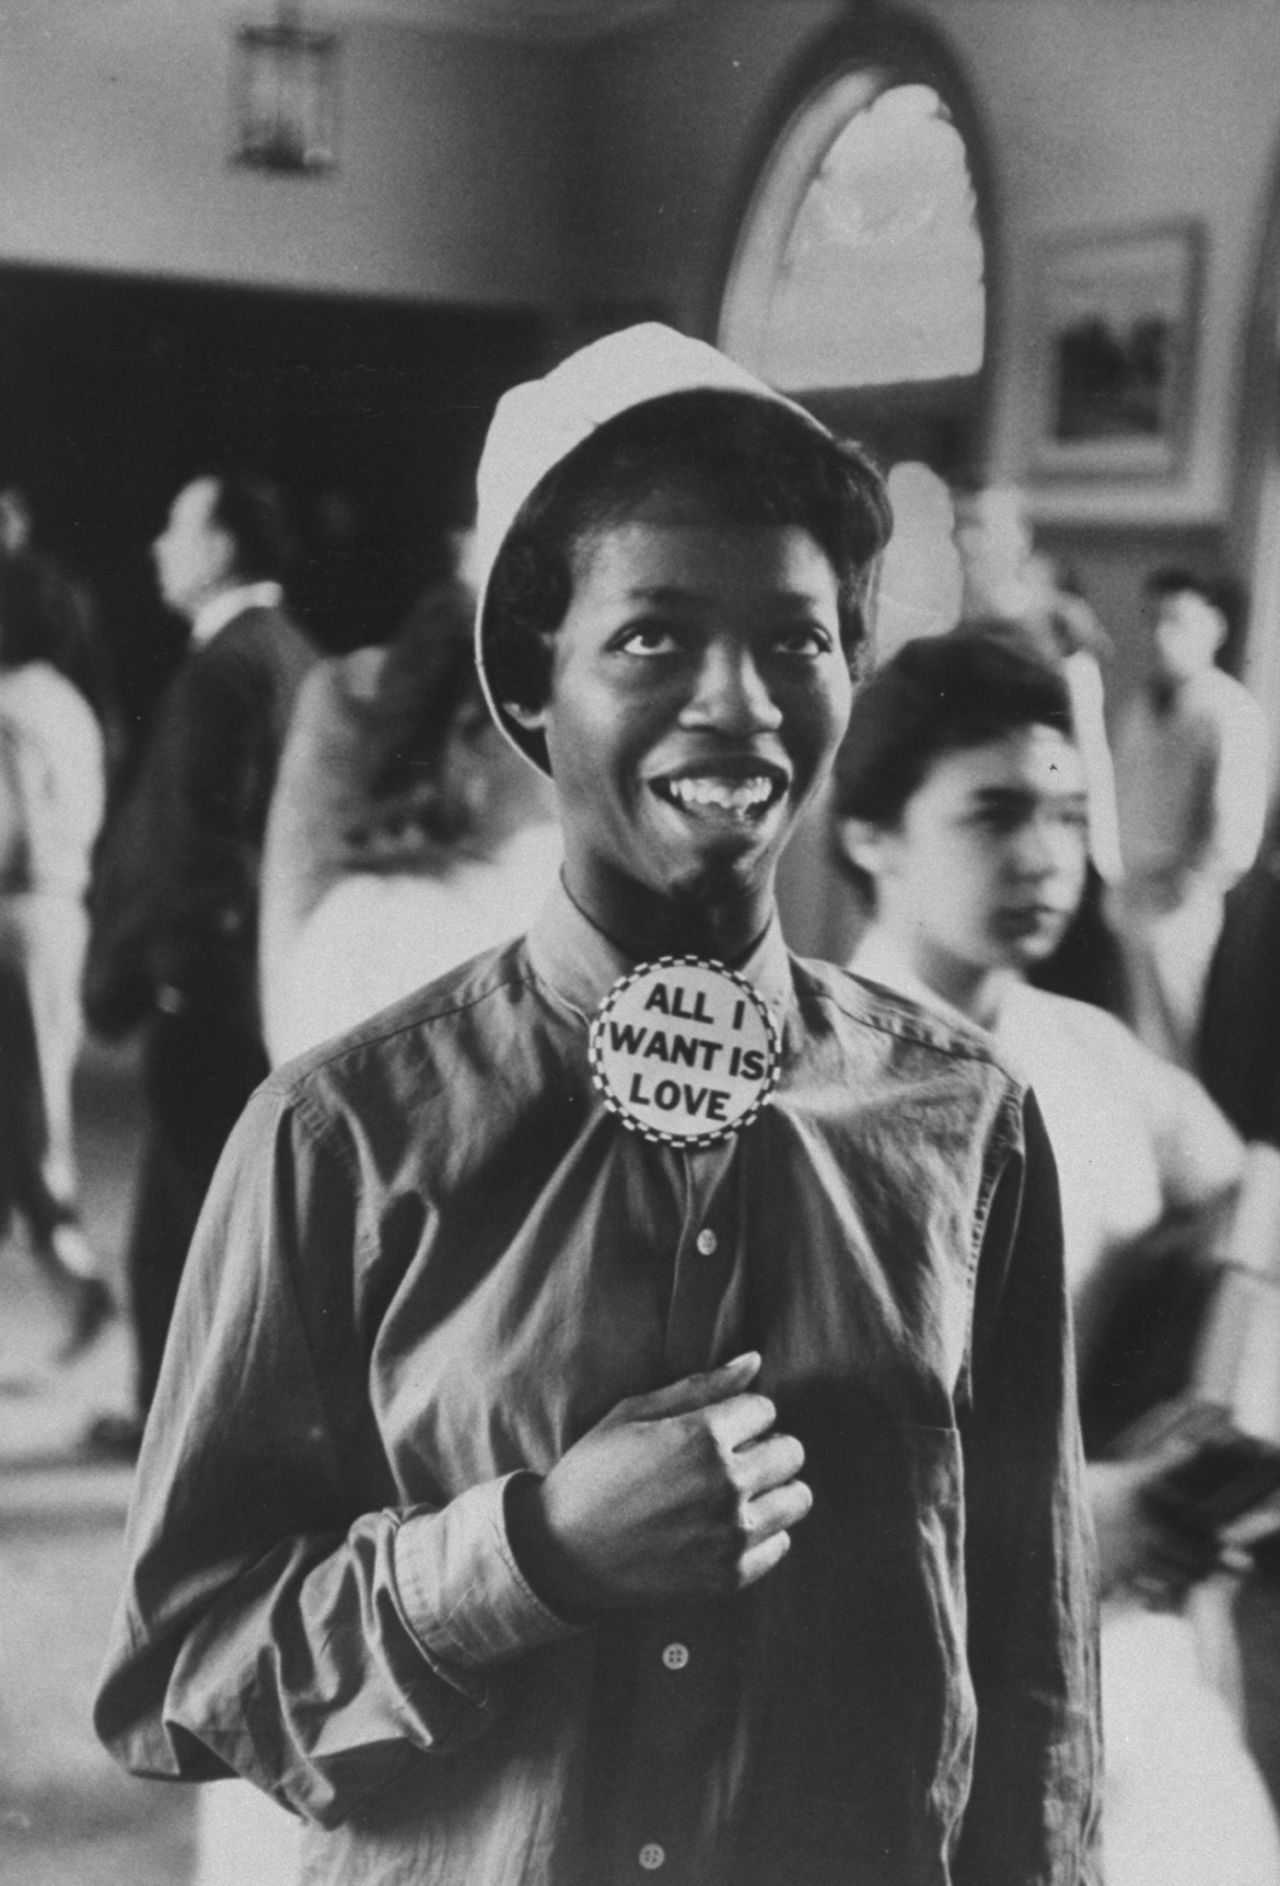 A young highschool student photographed by Gordon Parks 